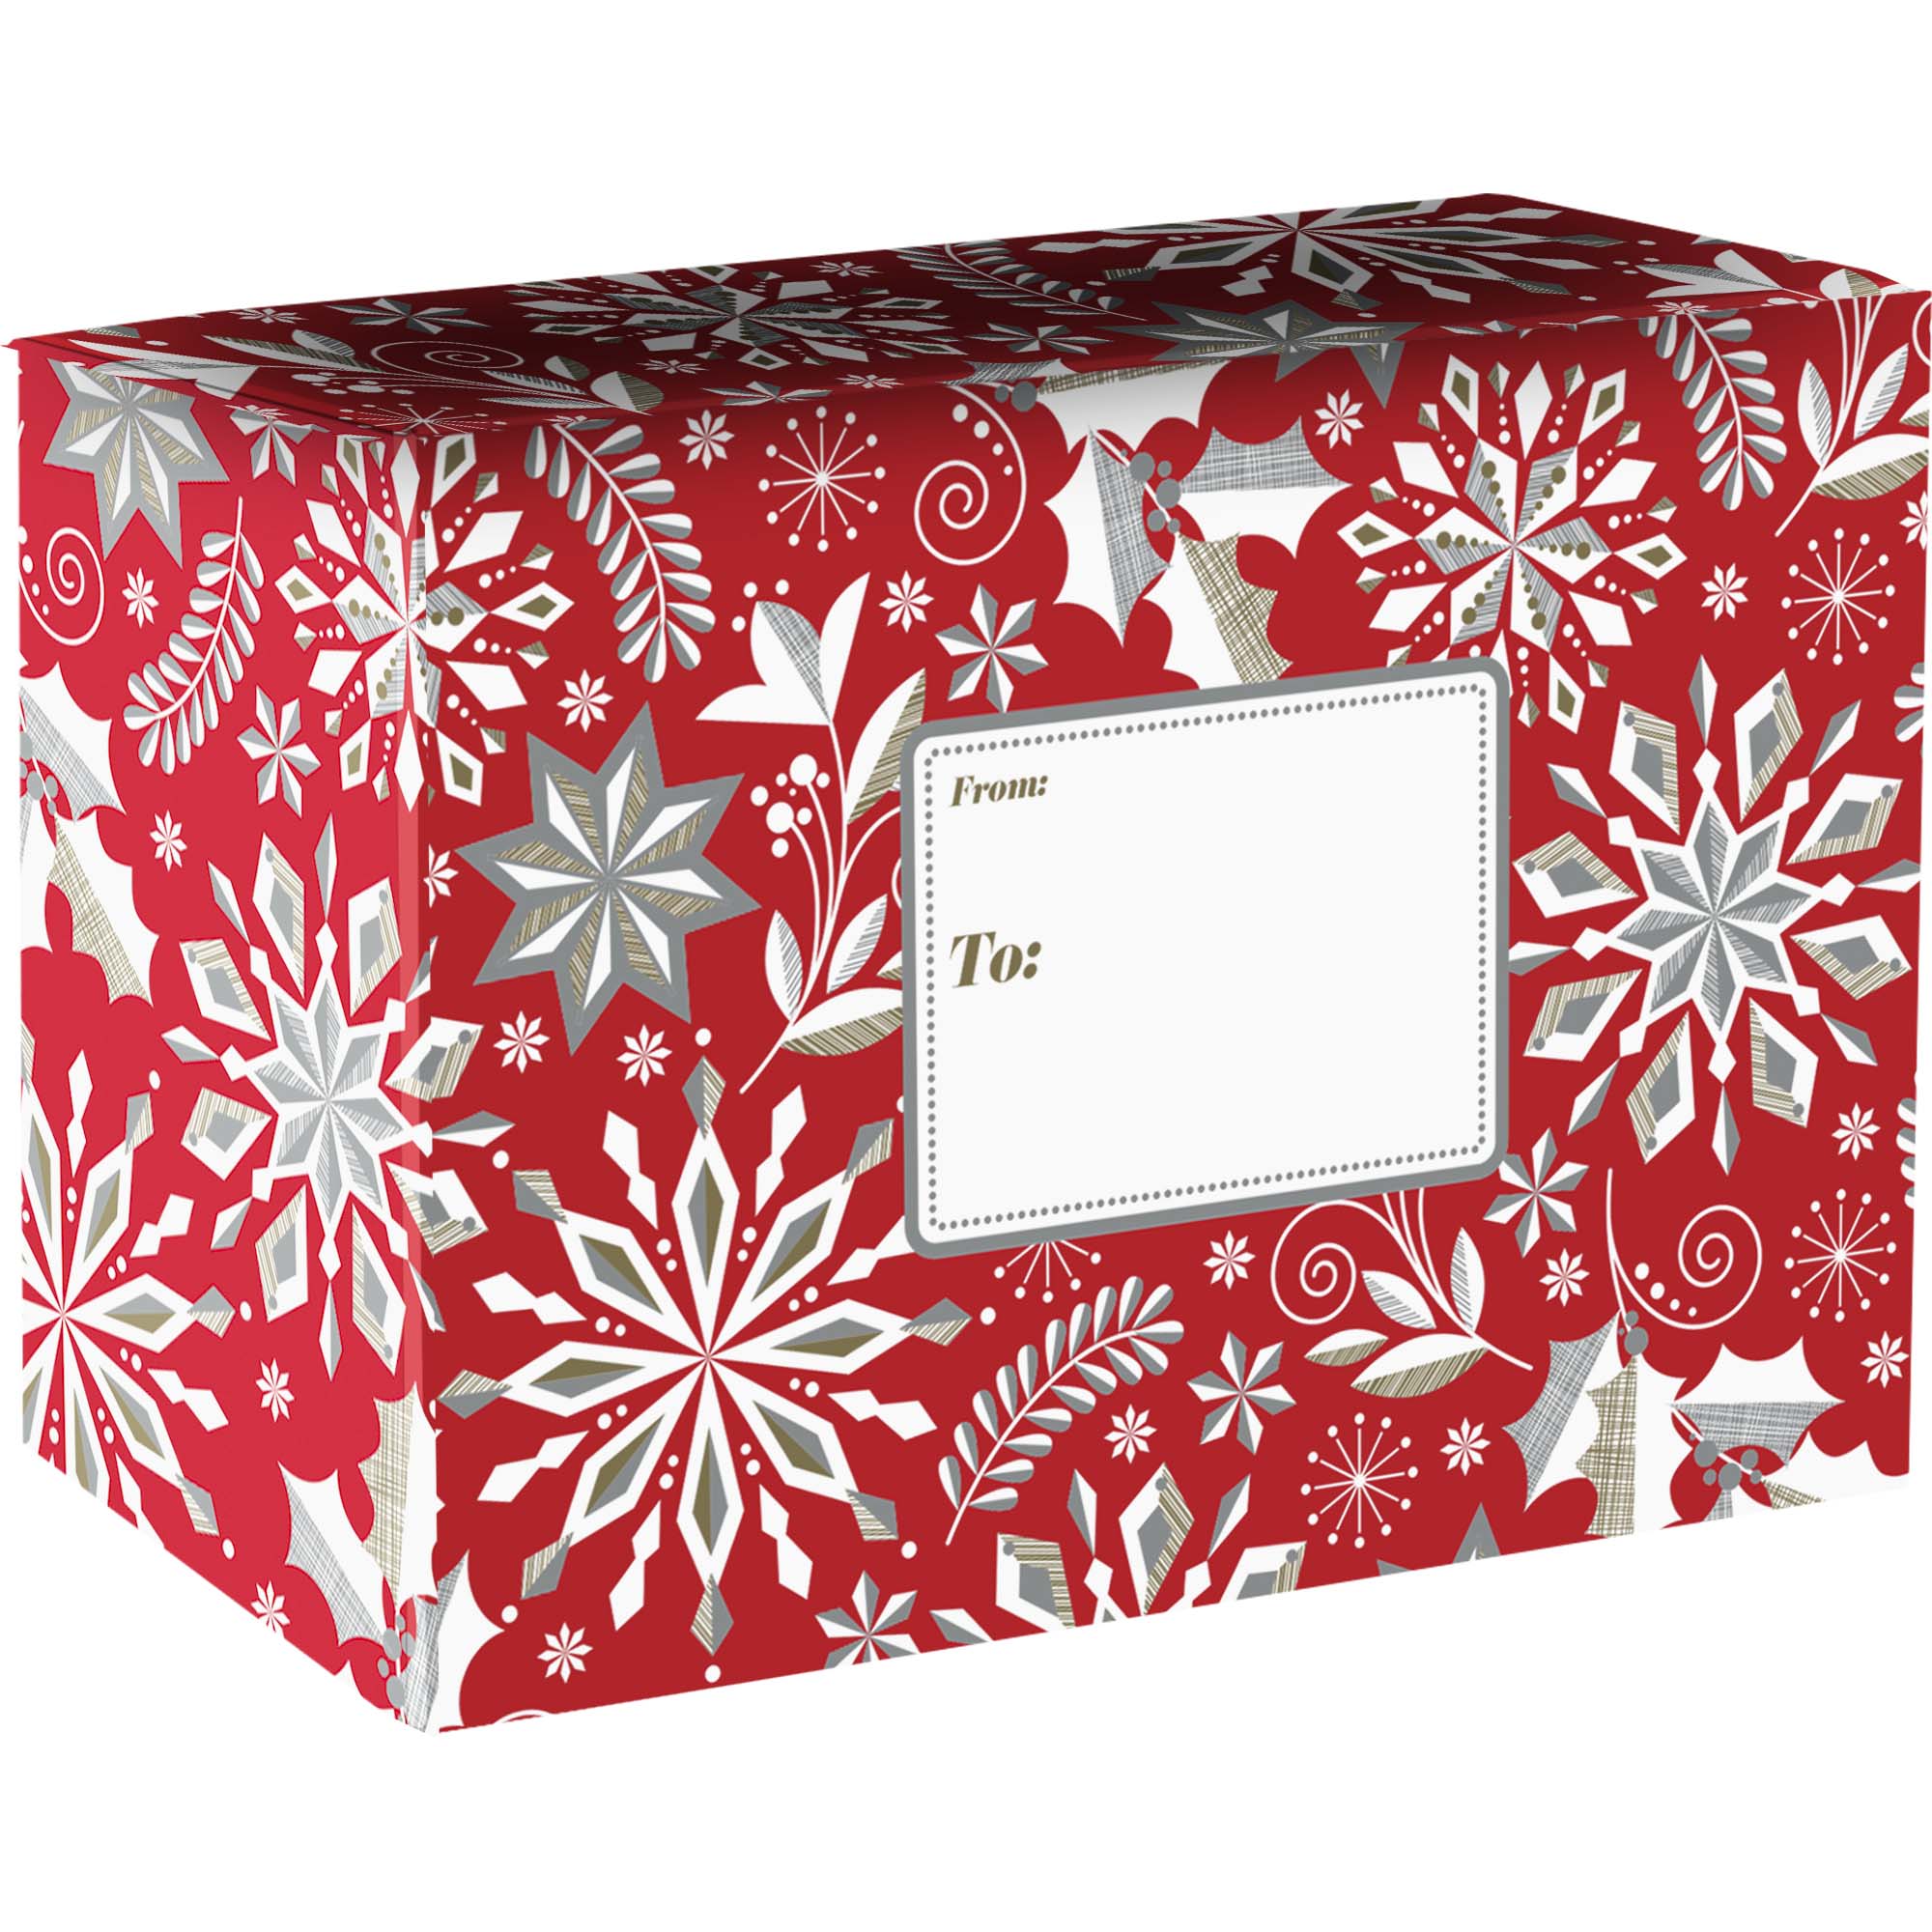 Merriment Red Small Christmas Printed Gift Mailing Boxes